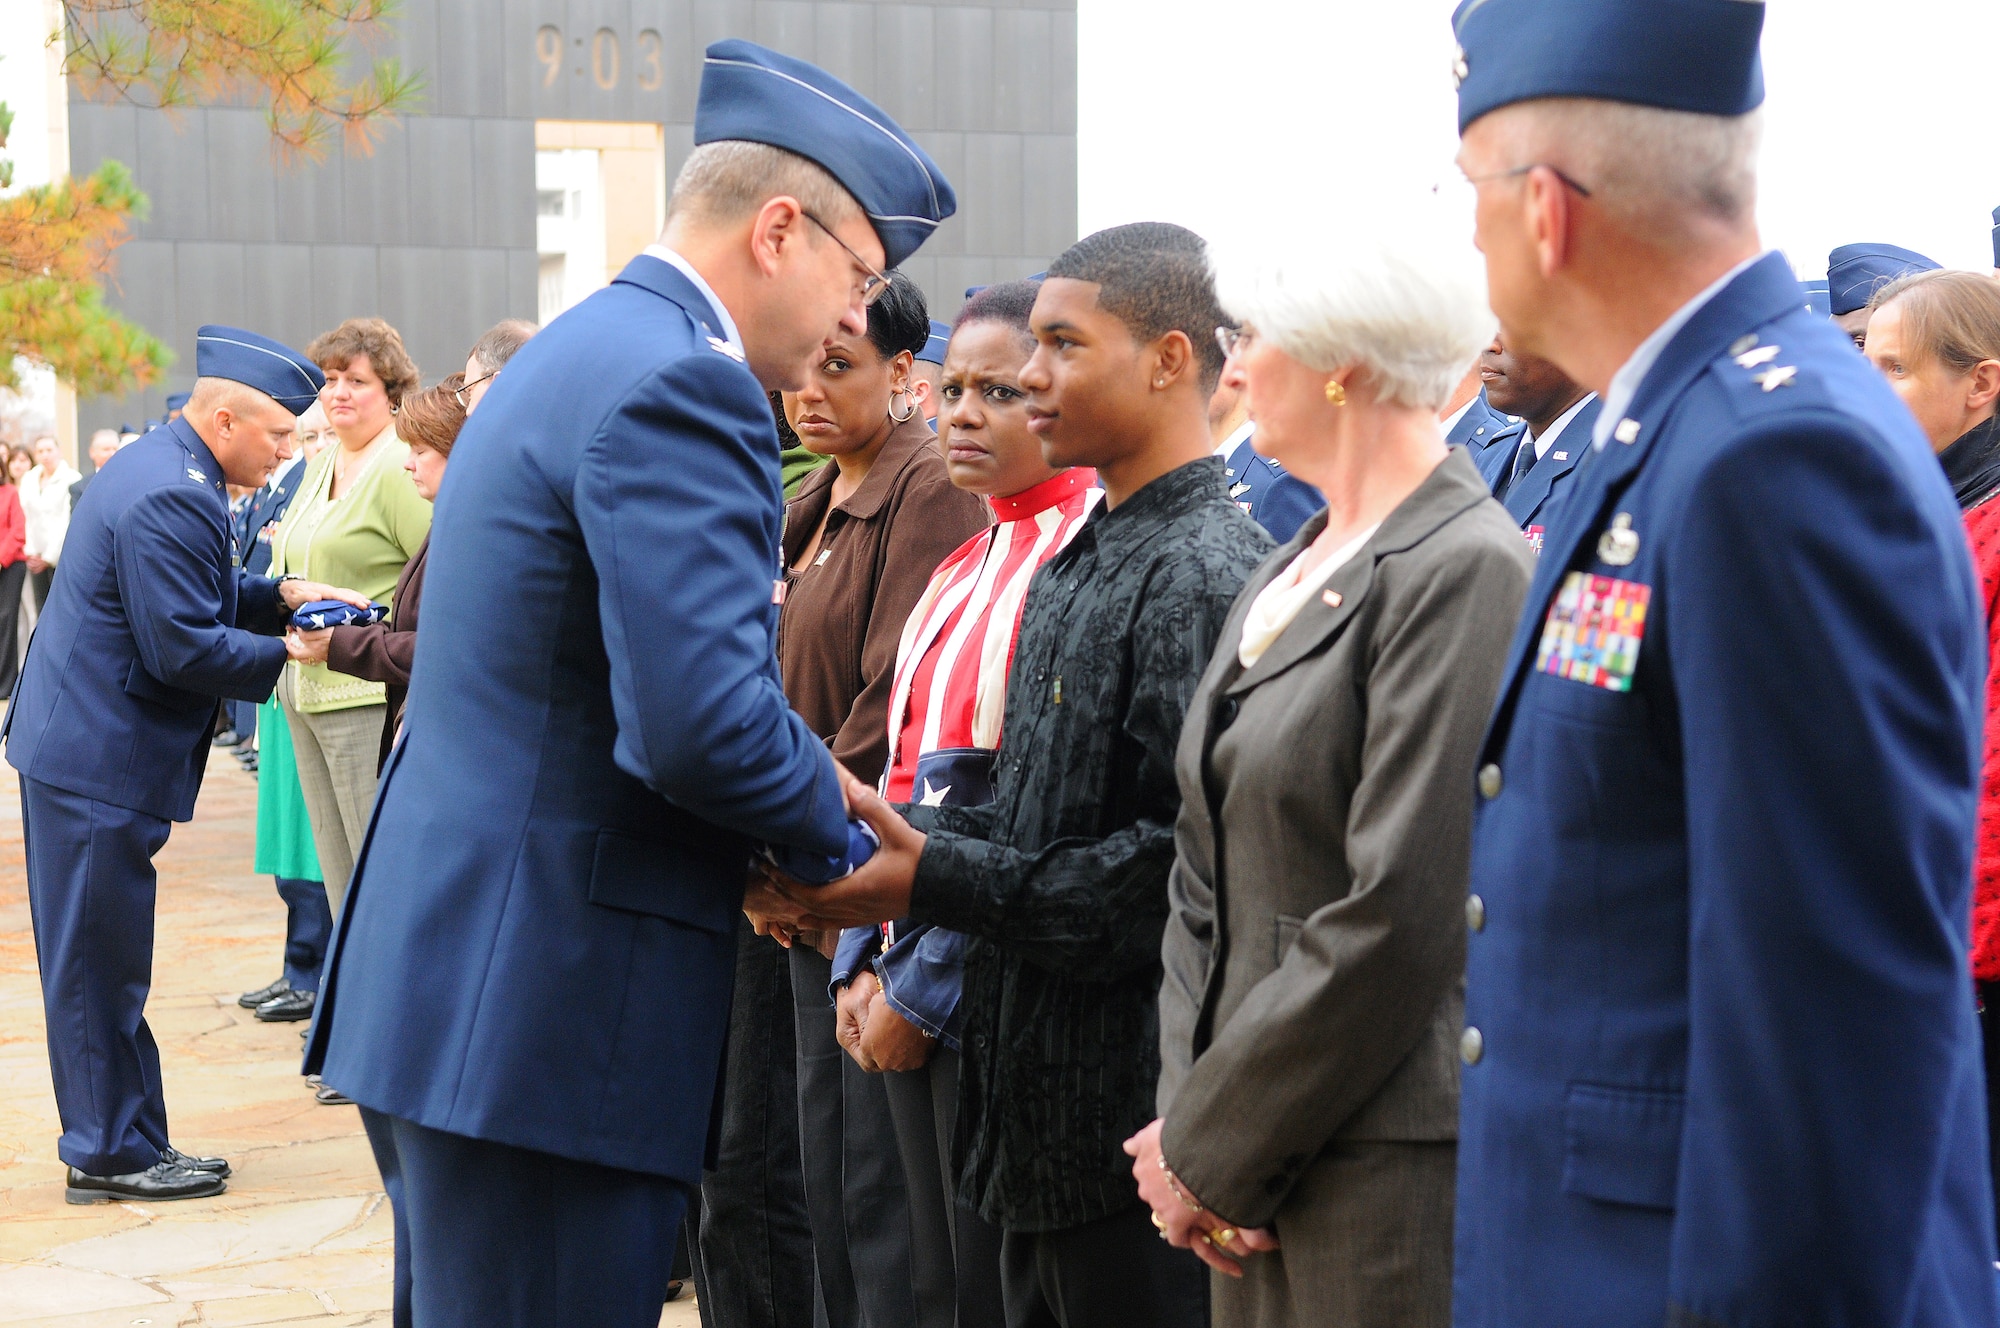 Friends and family of Airman 1st Class LaKesha Richardson Levy, including her son Corey Levy and mother Constance Favorite (red and white stripes), accept a flag from 72nd Medical Group commander, Col. Robert Marks, during a Veterans Day wreath laying ceremony at the Oklahoma City National Memorial as Oklahoma City Air Logistics Center commander, Maj. Gen. David Gillett, and his wife Stacia look on. Far left, Col. Thomas Byrge, 3rd Combat Communications Group commander, presented a flag to the family of Airman 1st Class Cartney Jean McRaven. Both Airmen were killed in the April 19, 1995, bombing of the Alfred P. Murrah Federal Building. Earlier, General and Mrs. Gillett laid wreaths on the Airmen’s memorial chairs. (Air Force photo by Dave Faytinger)